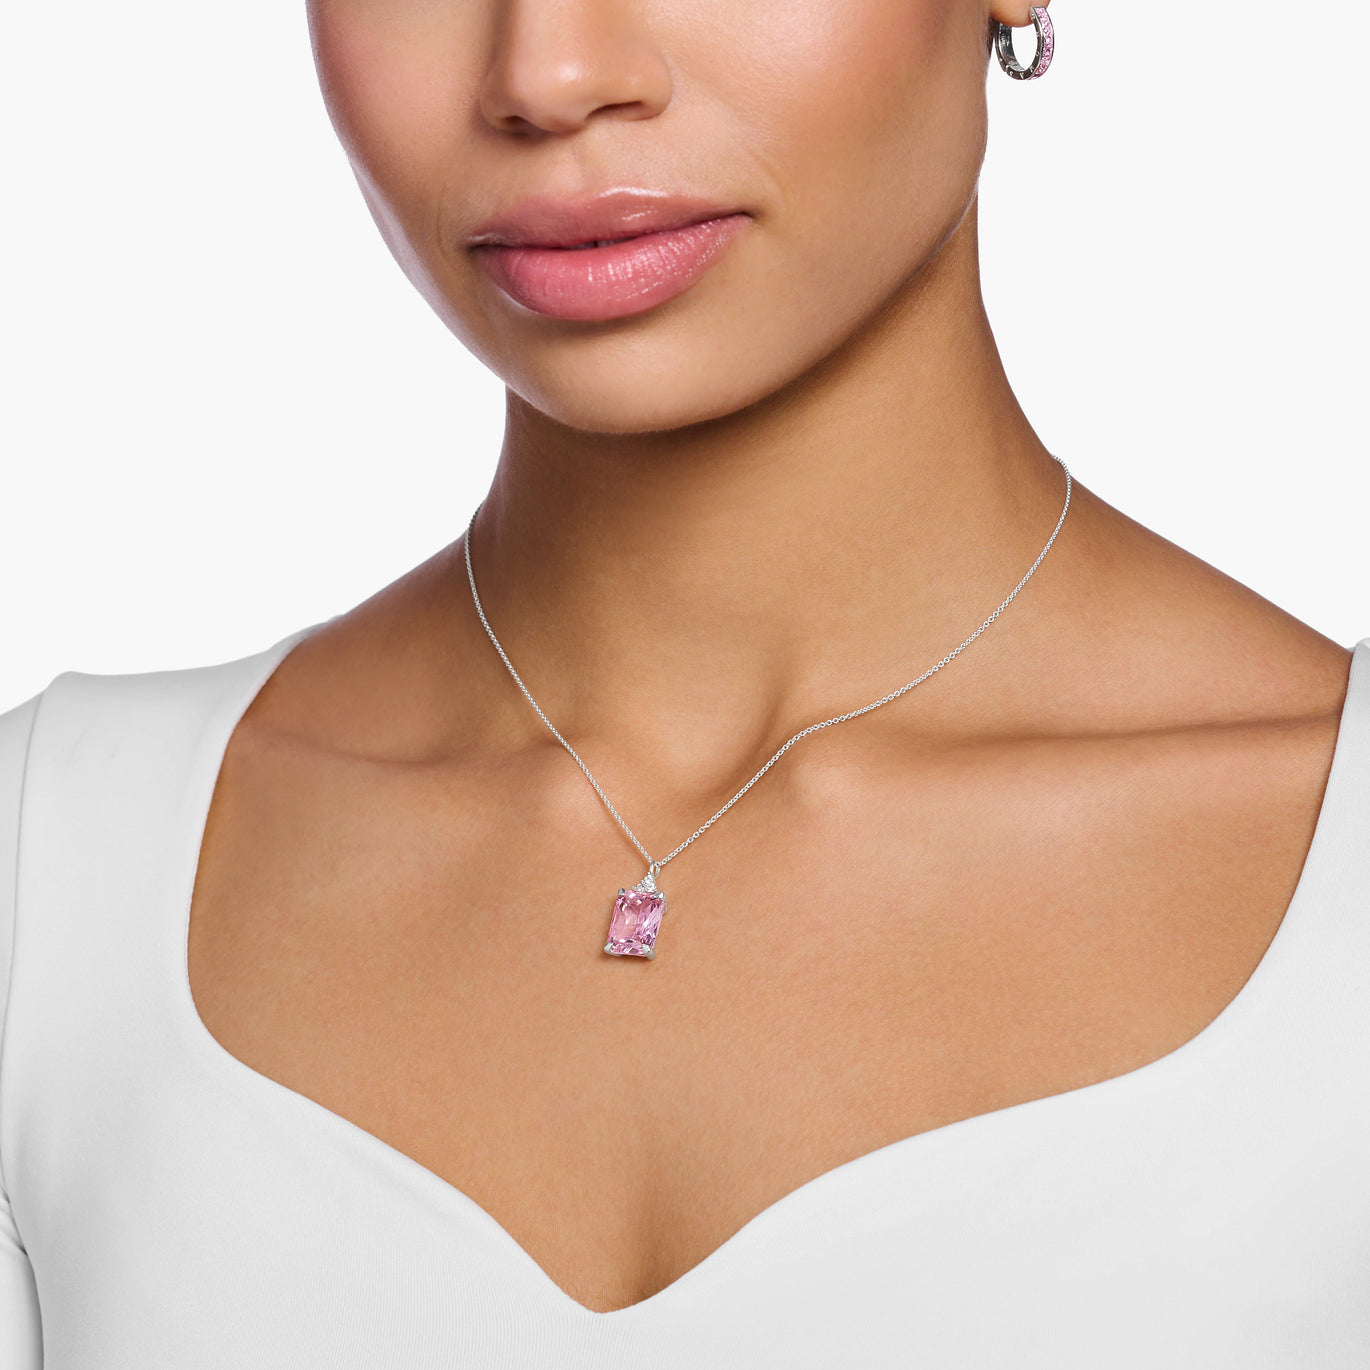 Thomas Sabo Silver Necklace with Pink Stone